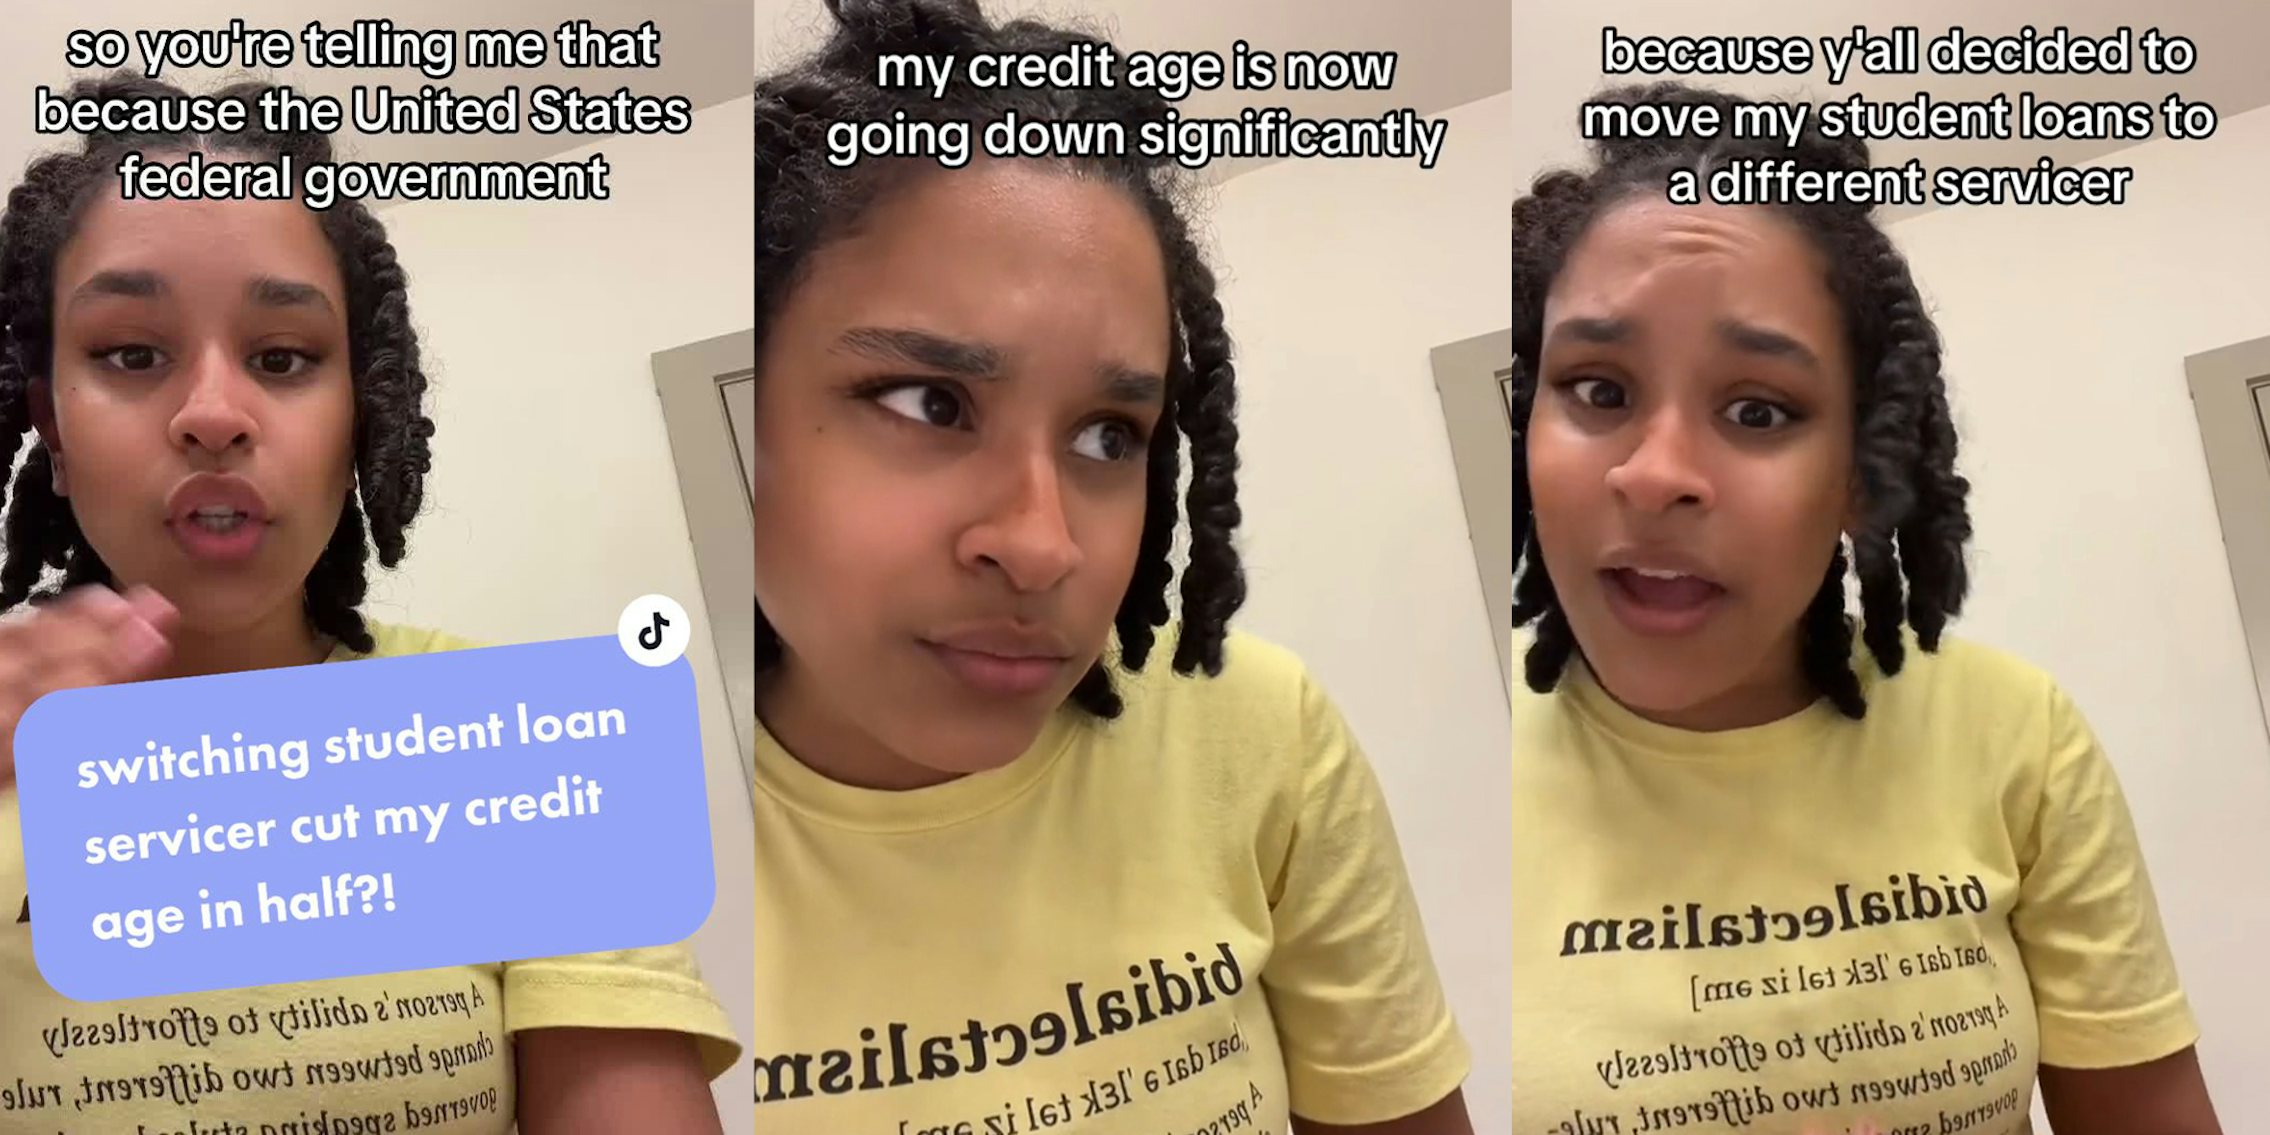 Woman says FAFSA changed her student loan provider against her will, messed up her credit age